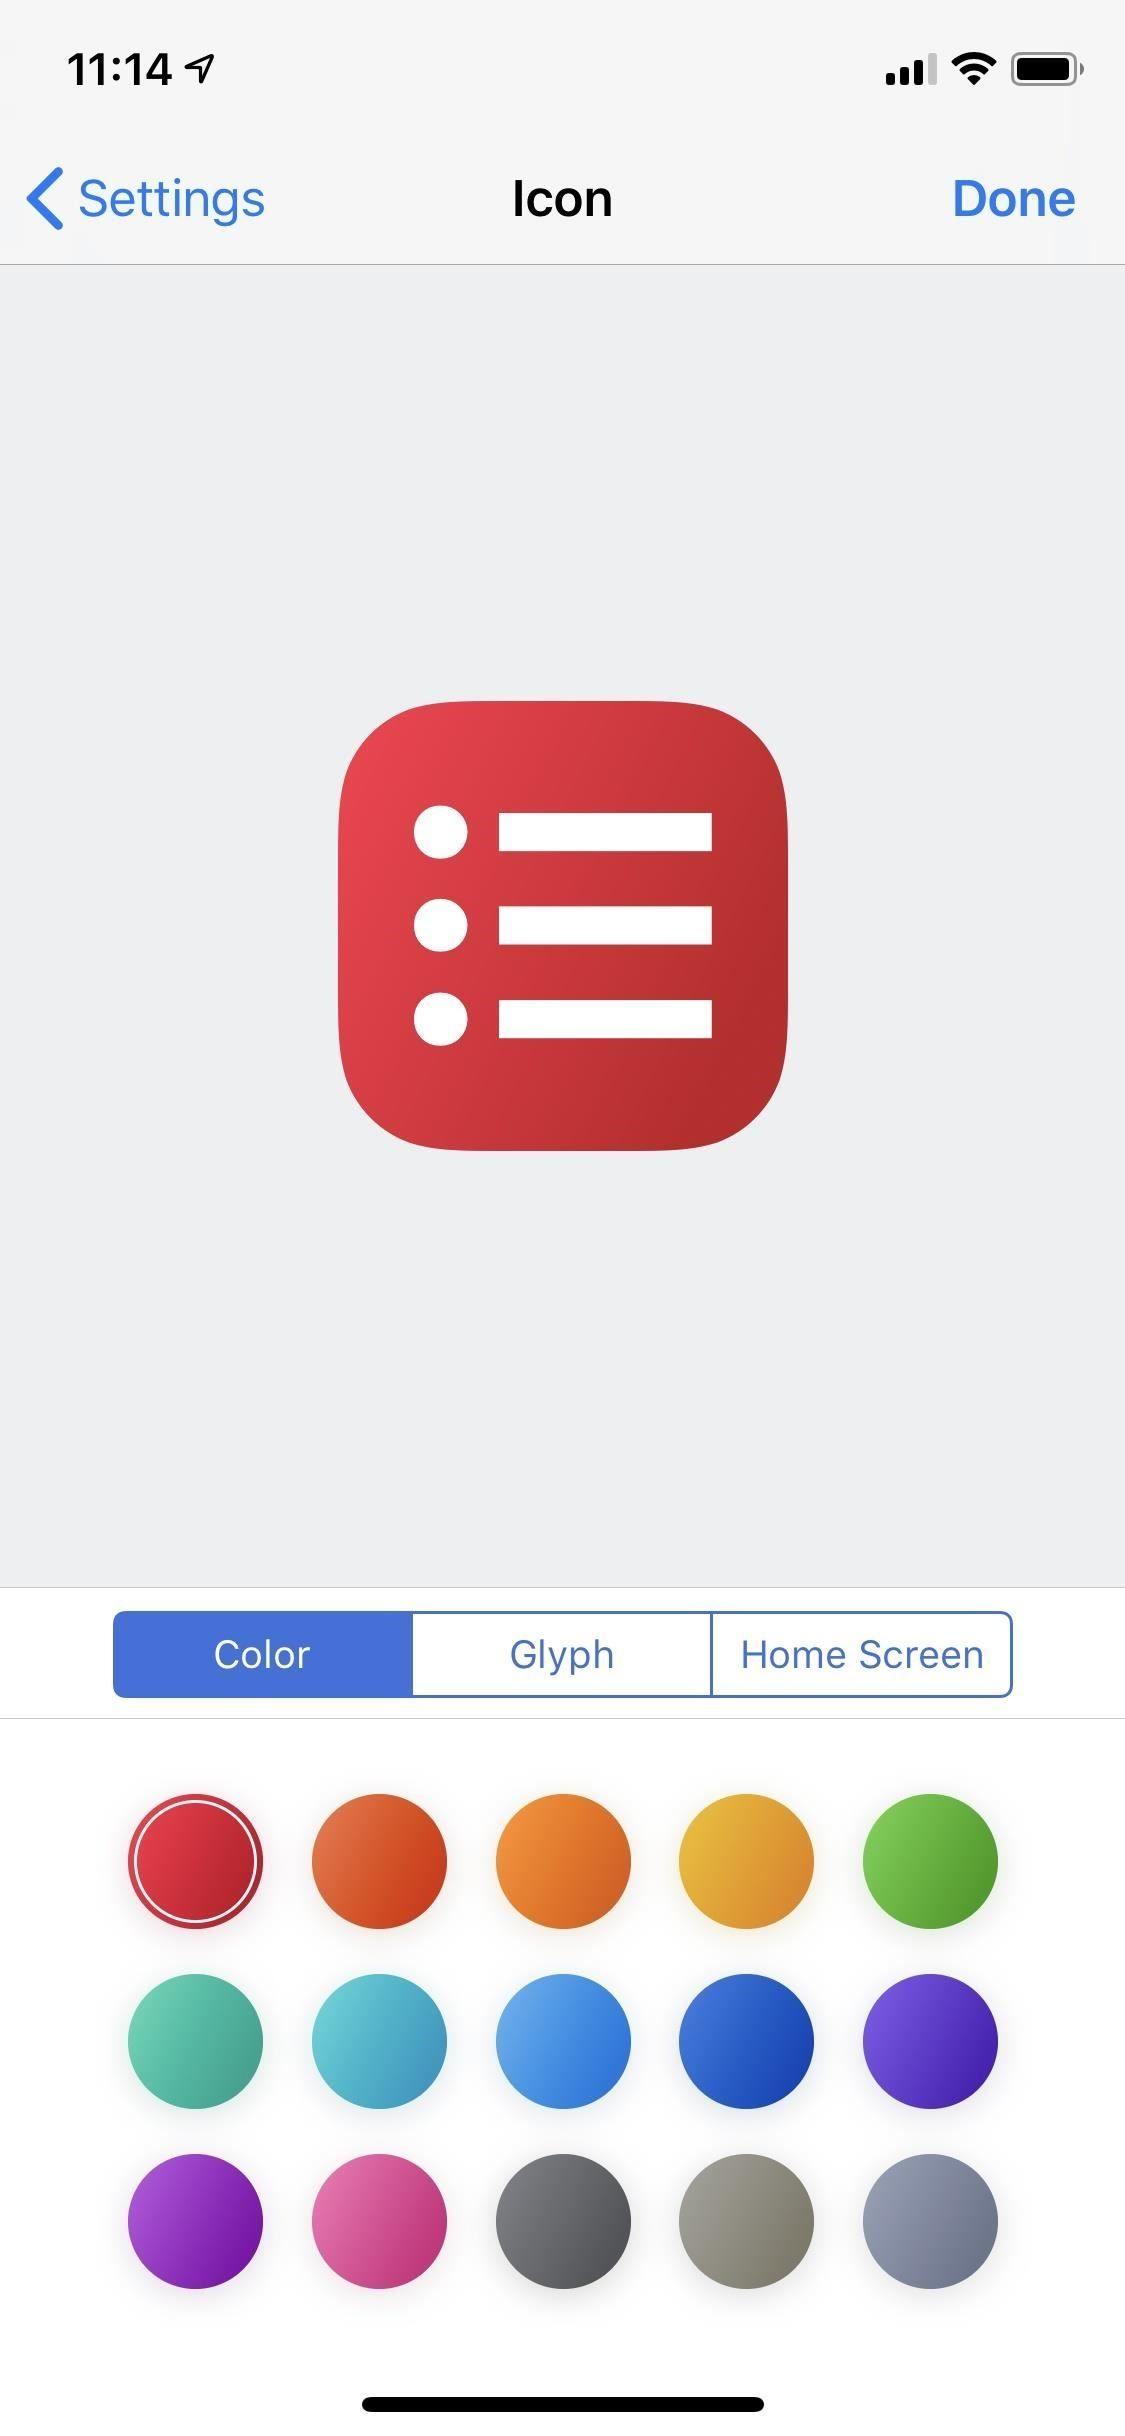 Google Voice iPhone App Logo - How to Use the Shortcuts App on Your iPhone in iOS 12 for Custom